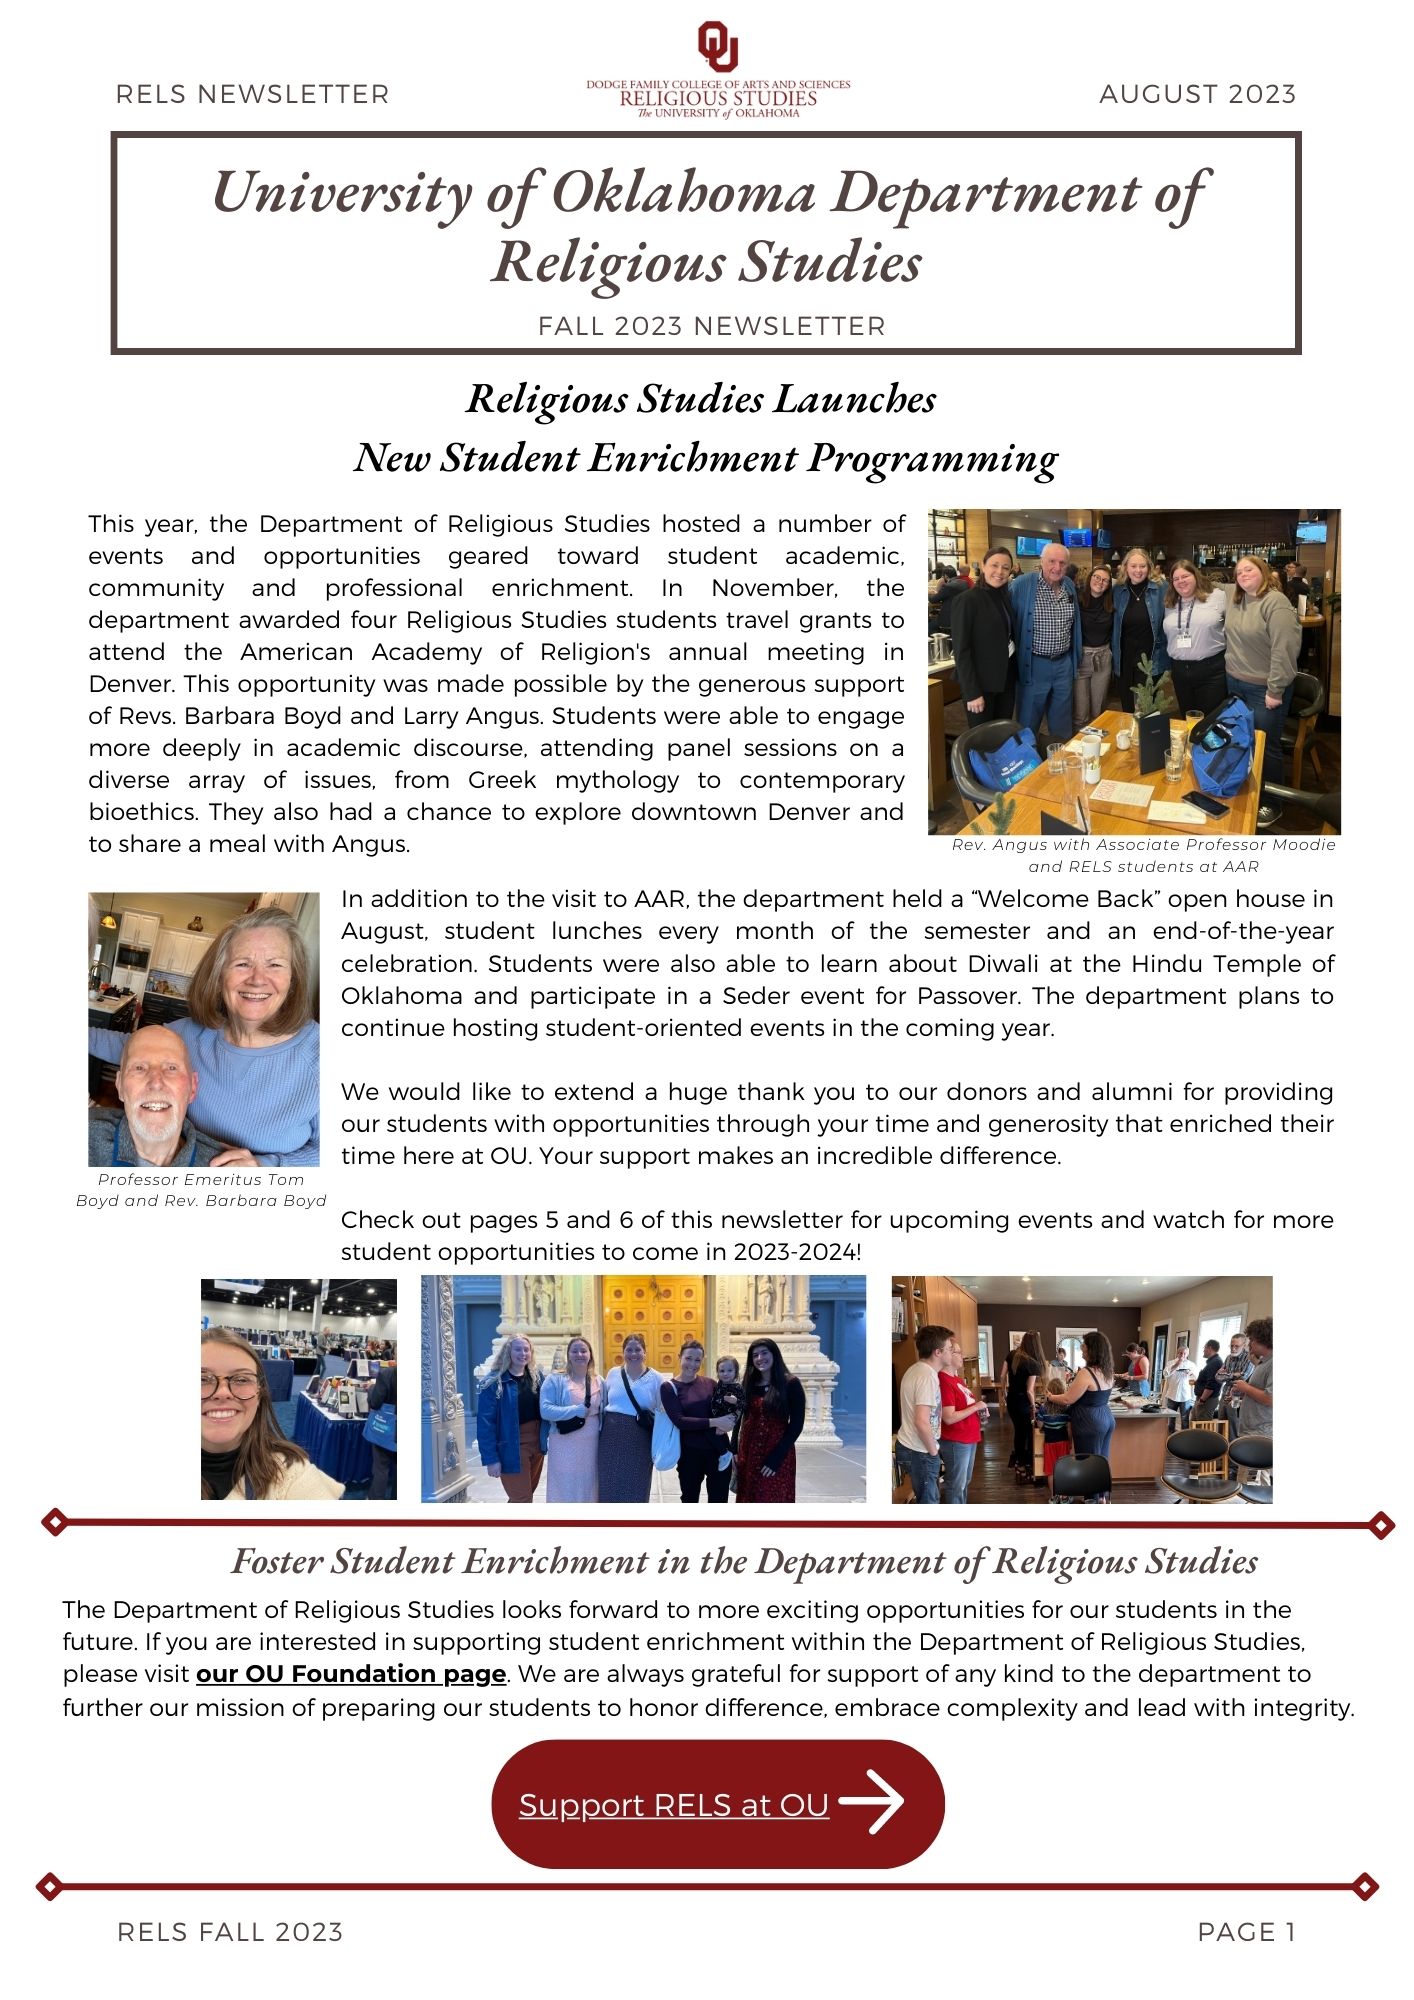 Front page of RELS Fall 2023 Newsletter